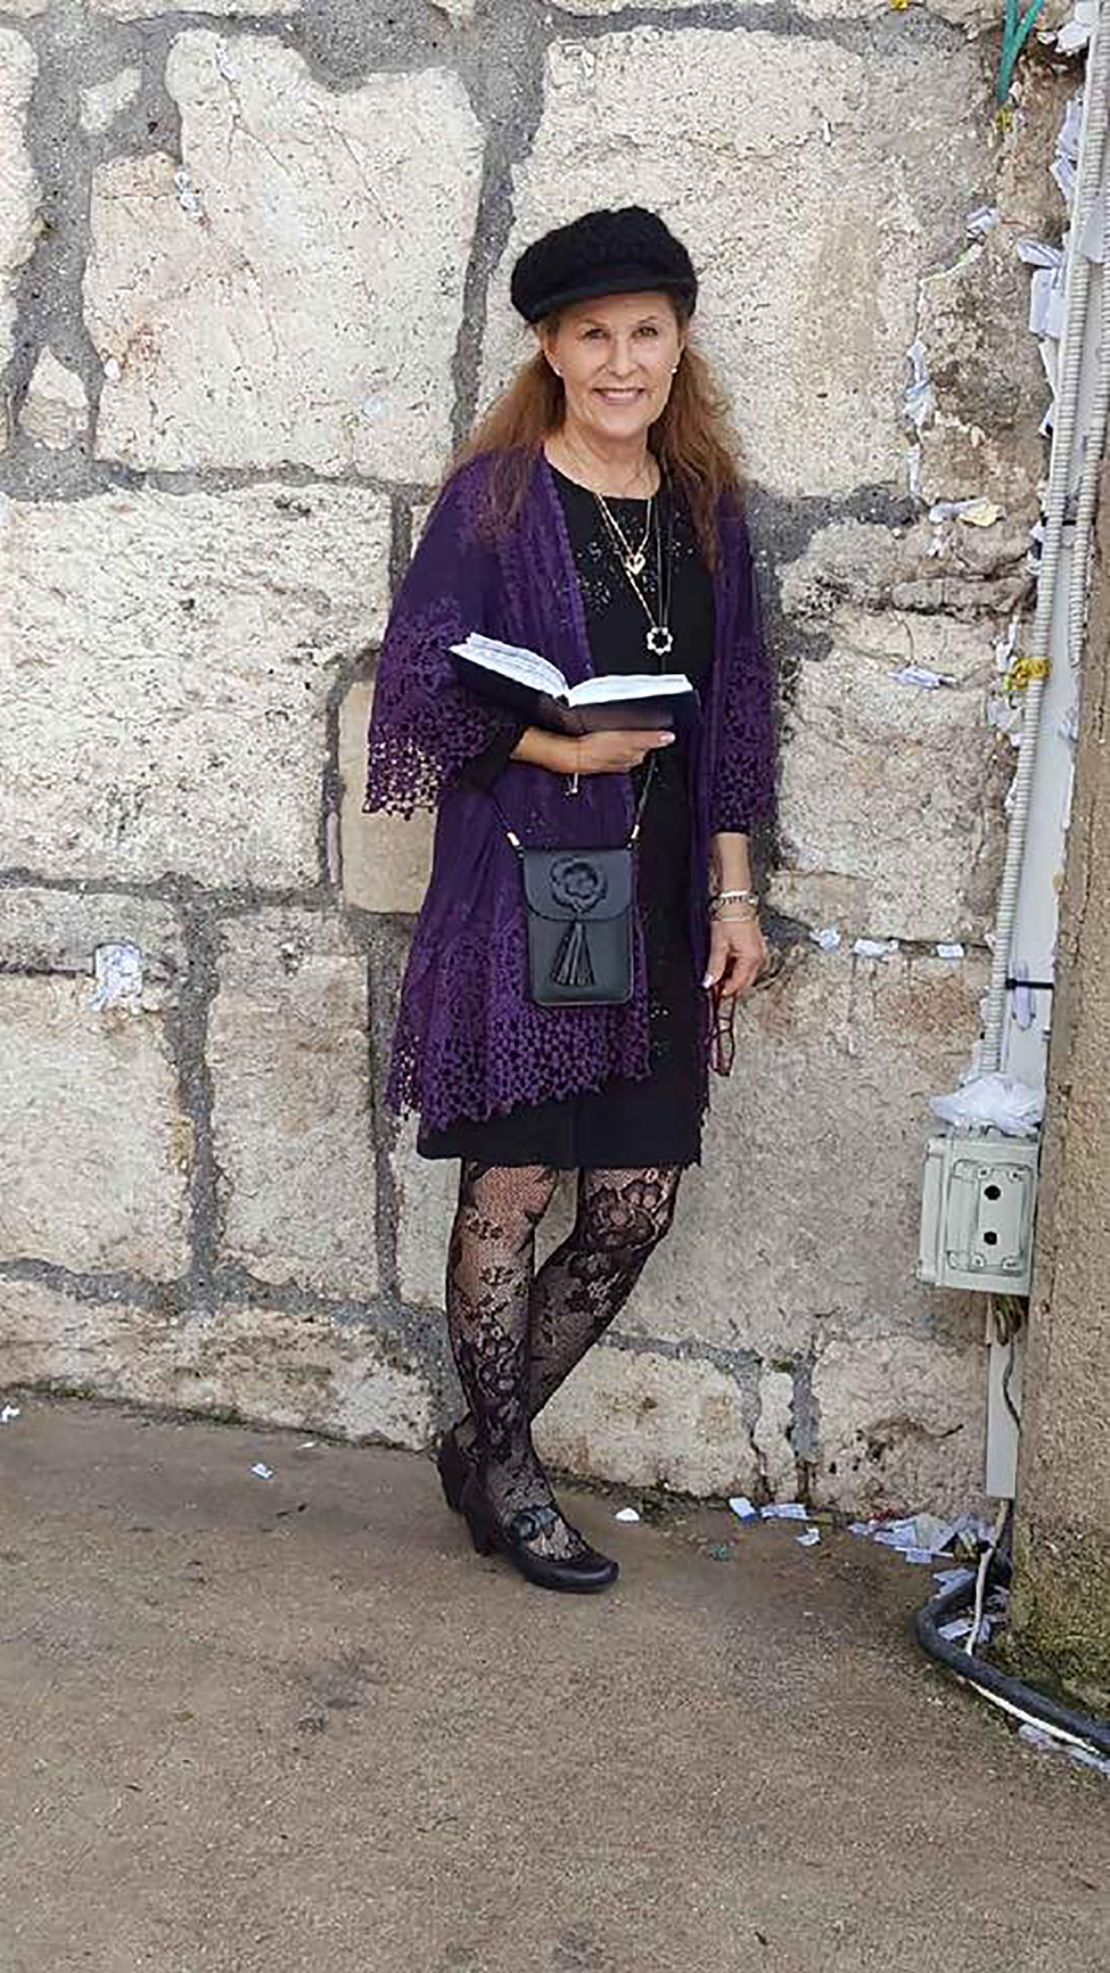 Lori Kaye was killed in a shooting at Congregation Chabad on the last day of Passover.